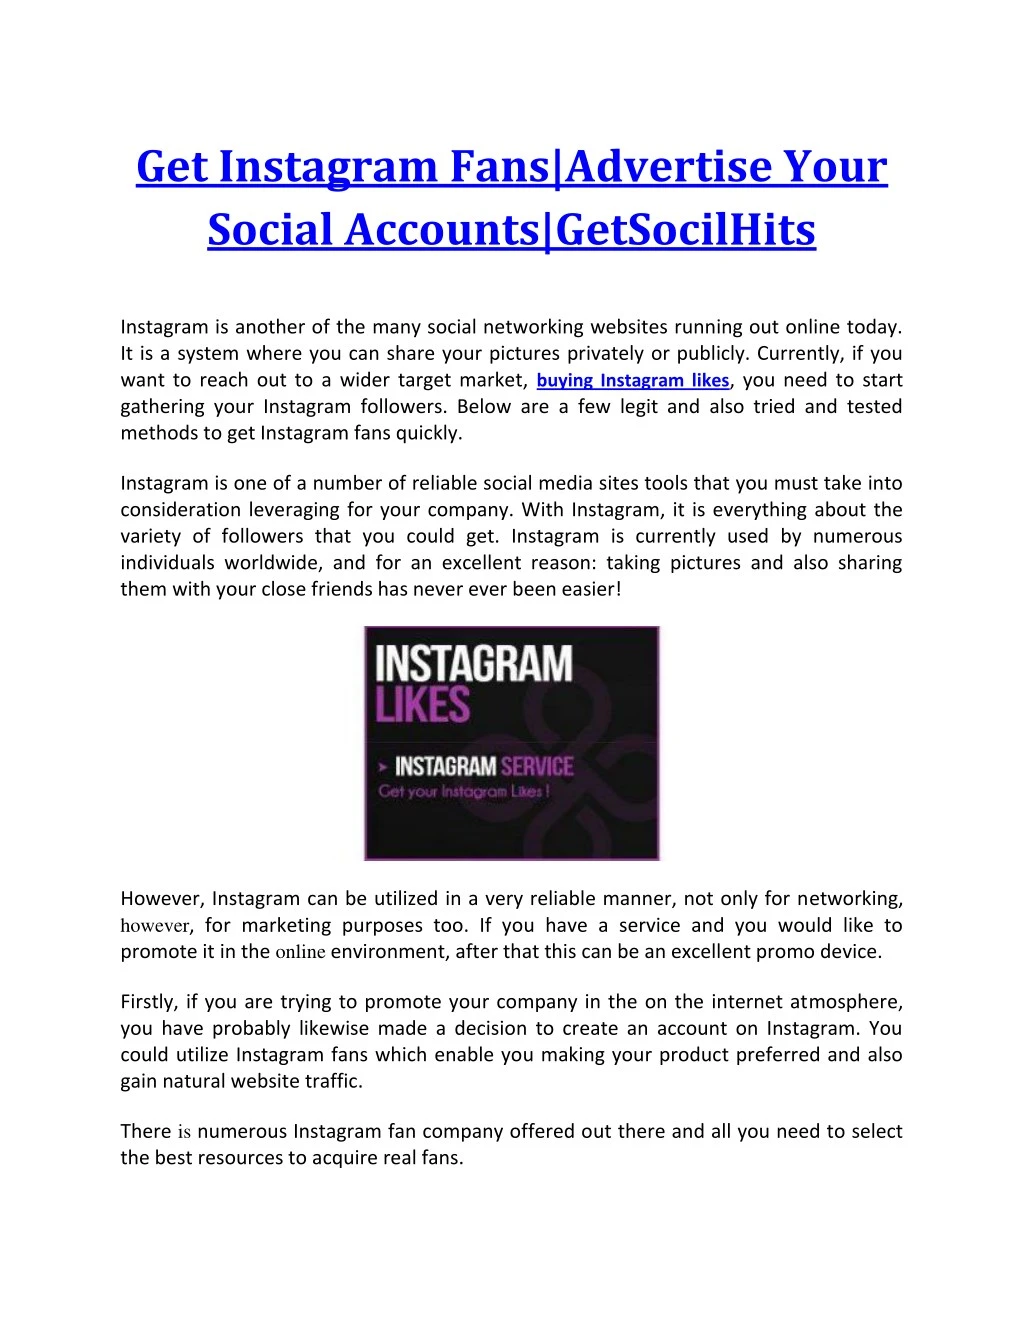 get instagram fans advertise your social accounts